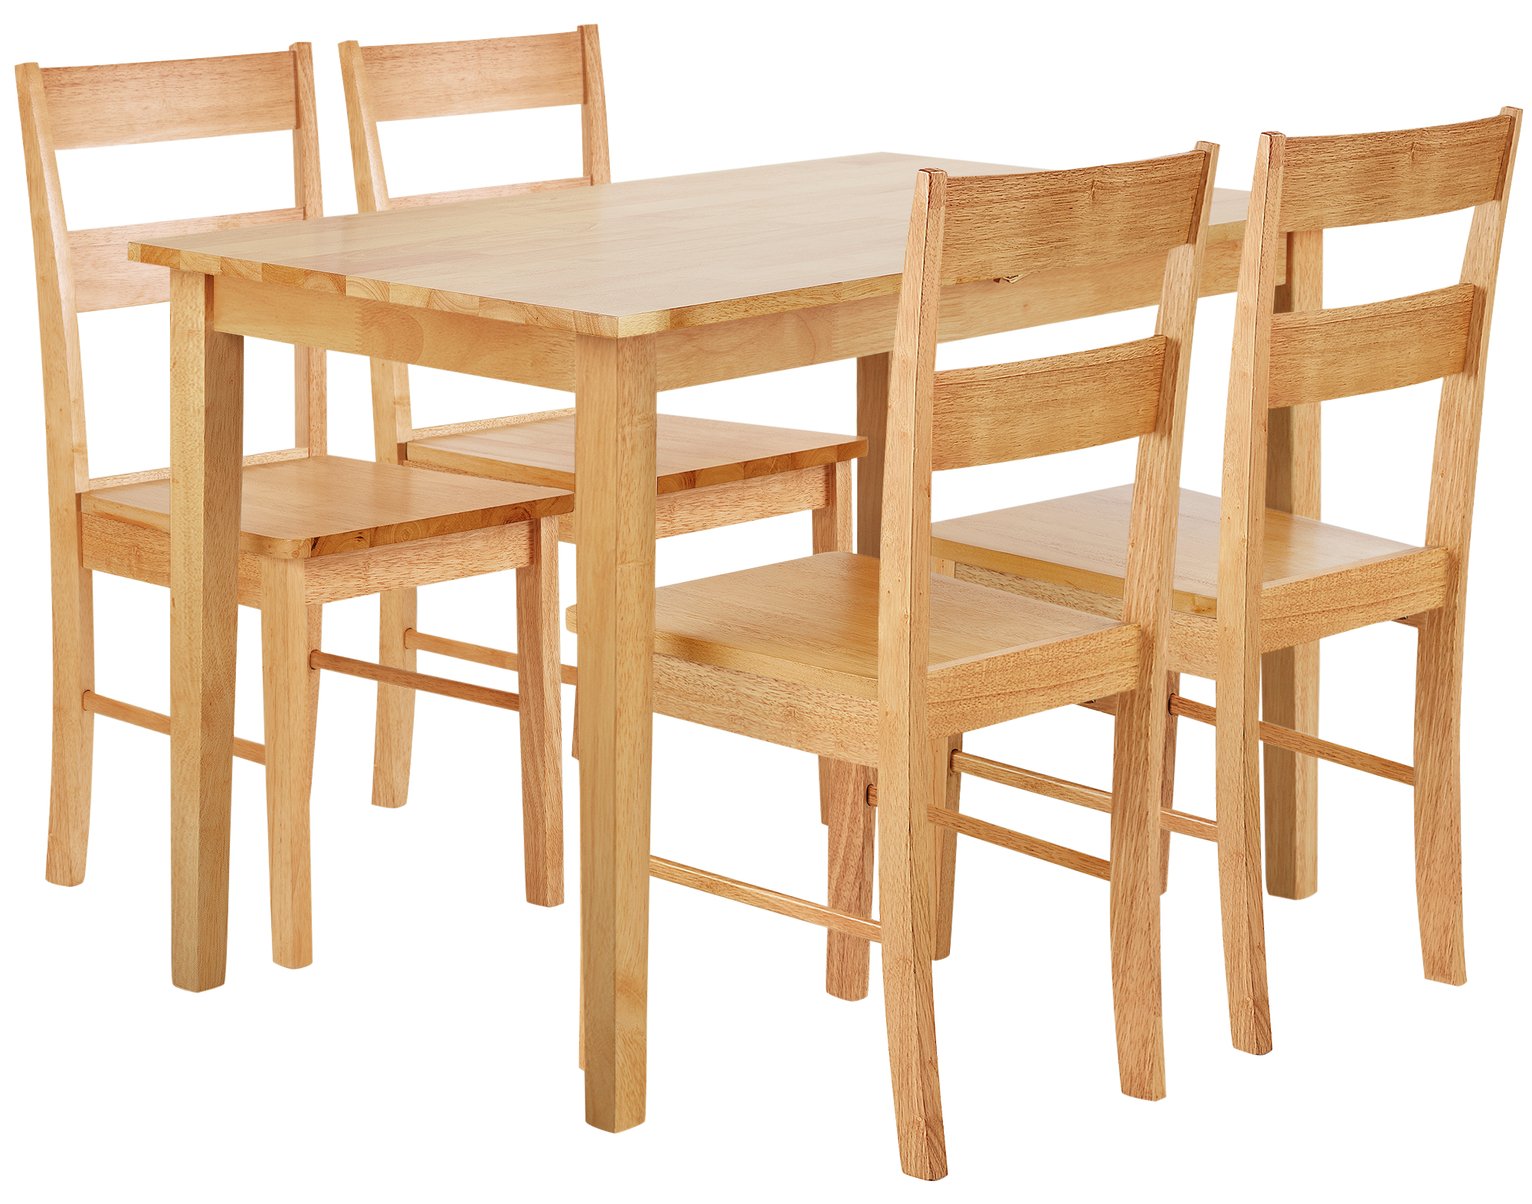 Argos Home Chicago Extendable Table & 4 Chairs - Natural